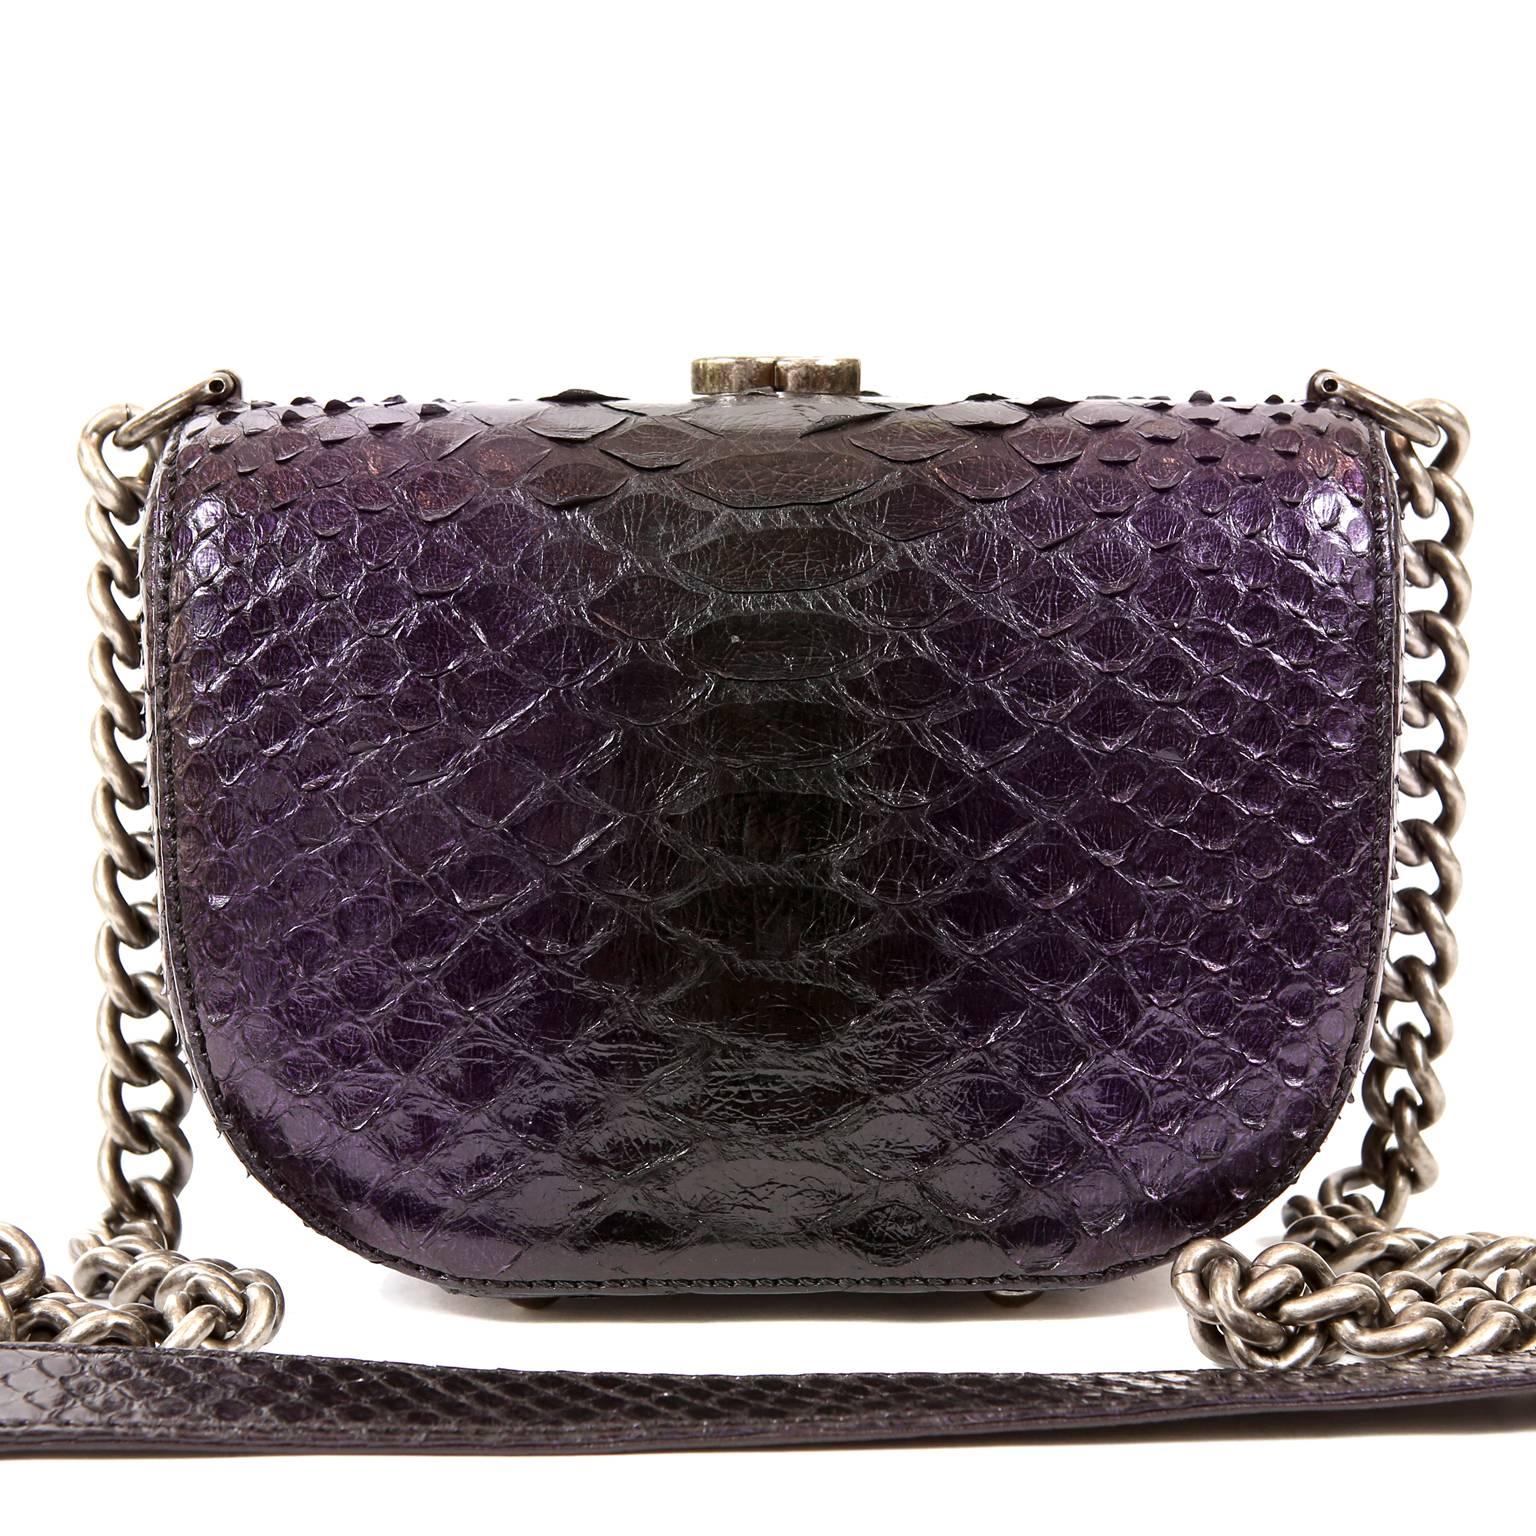 Chanel Purple Python Cross Body Bag- PRISTINE
 This exquisite exotic is a collectible piece and certain to hold its value. 
Deep purple python small structured bag has edgy ruthenium framing and CC clasp.  Opening at the top, the purple fabric ling